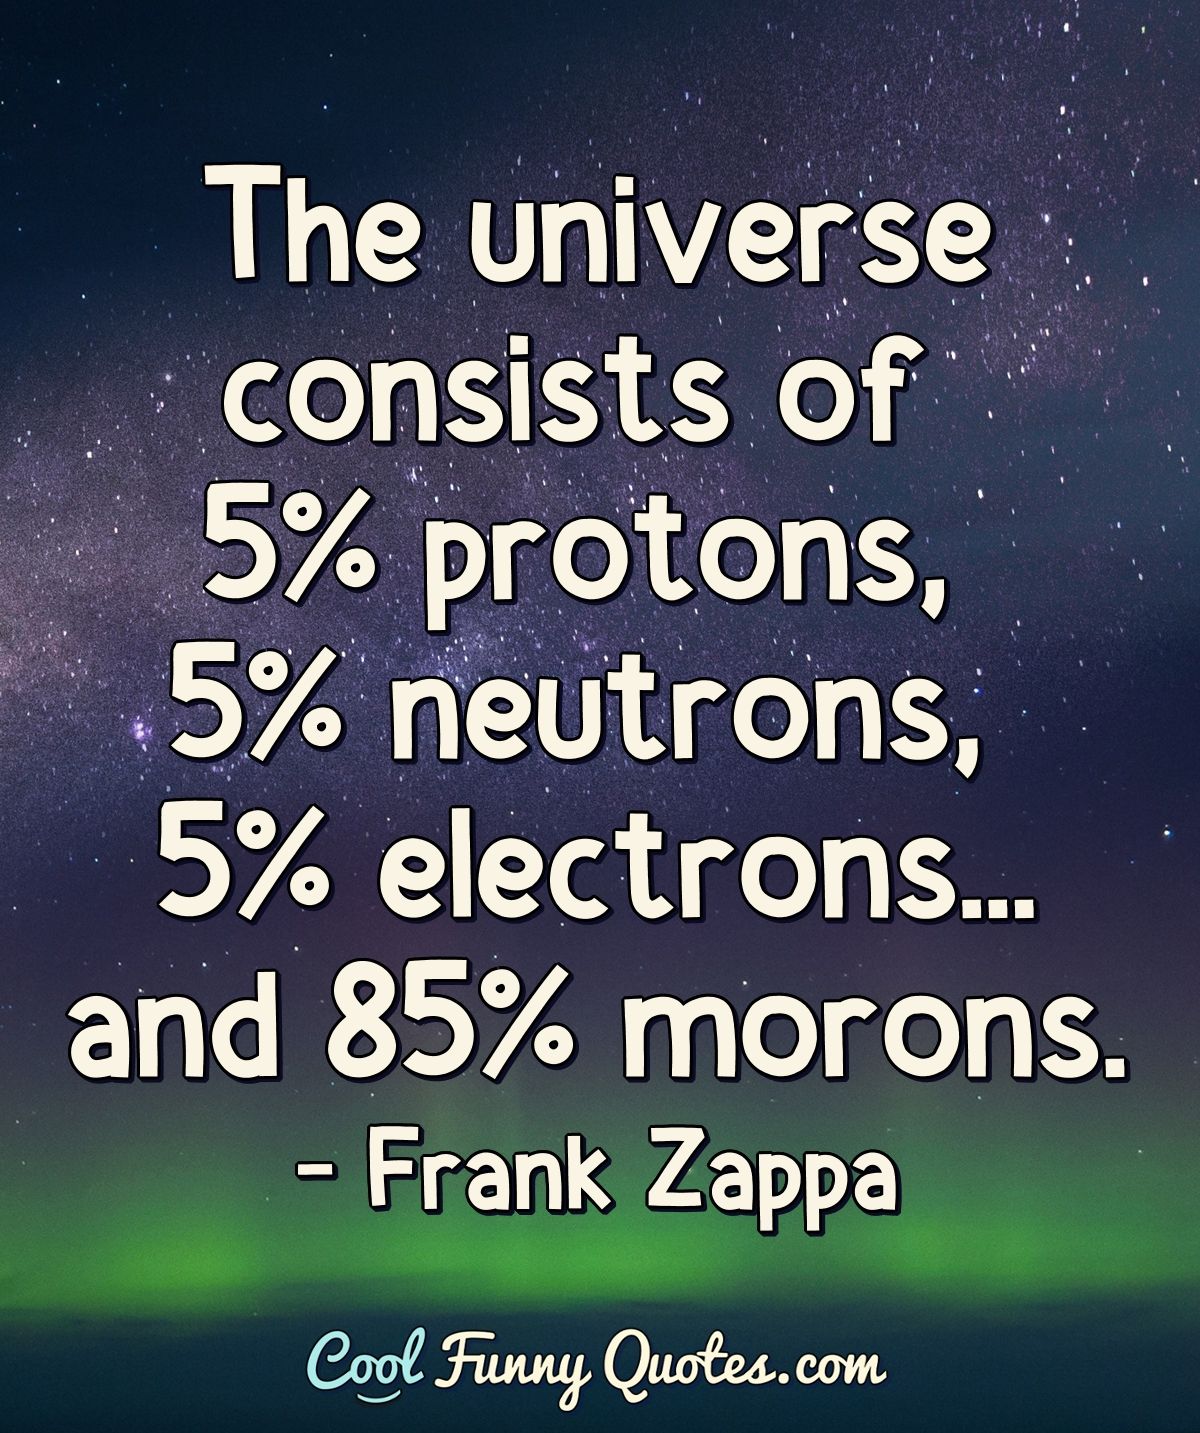 the-universe-consists-of-protons-neutrons-electrons-frank-zappa.jpg